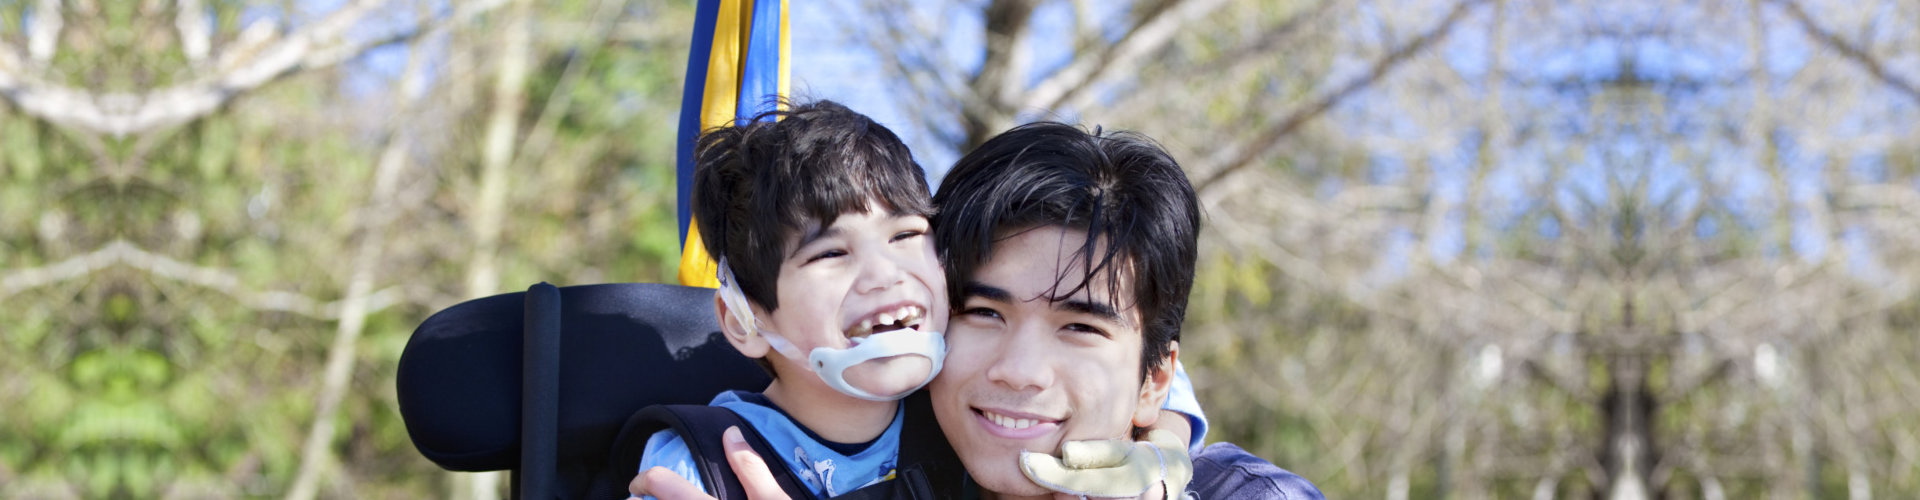 portrait of kid with disability and young man